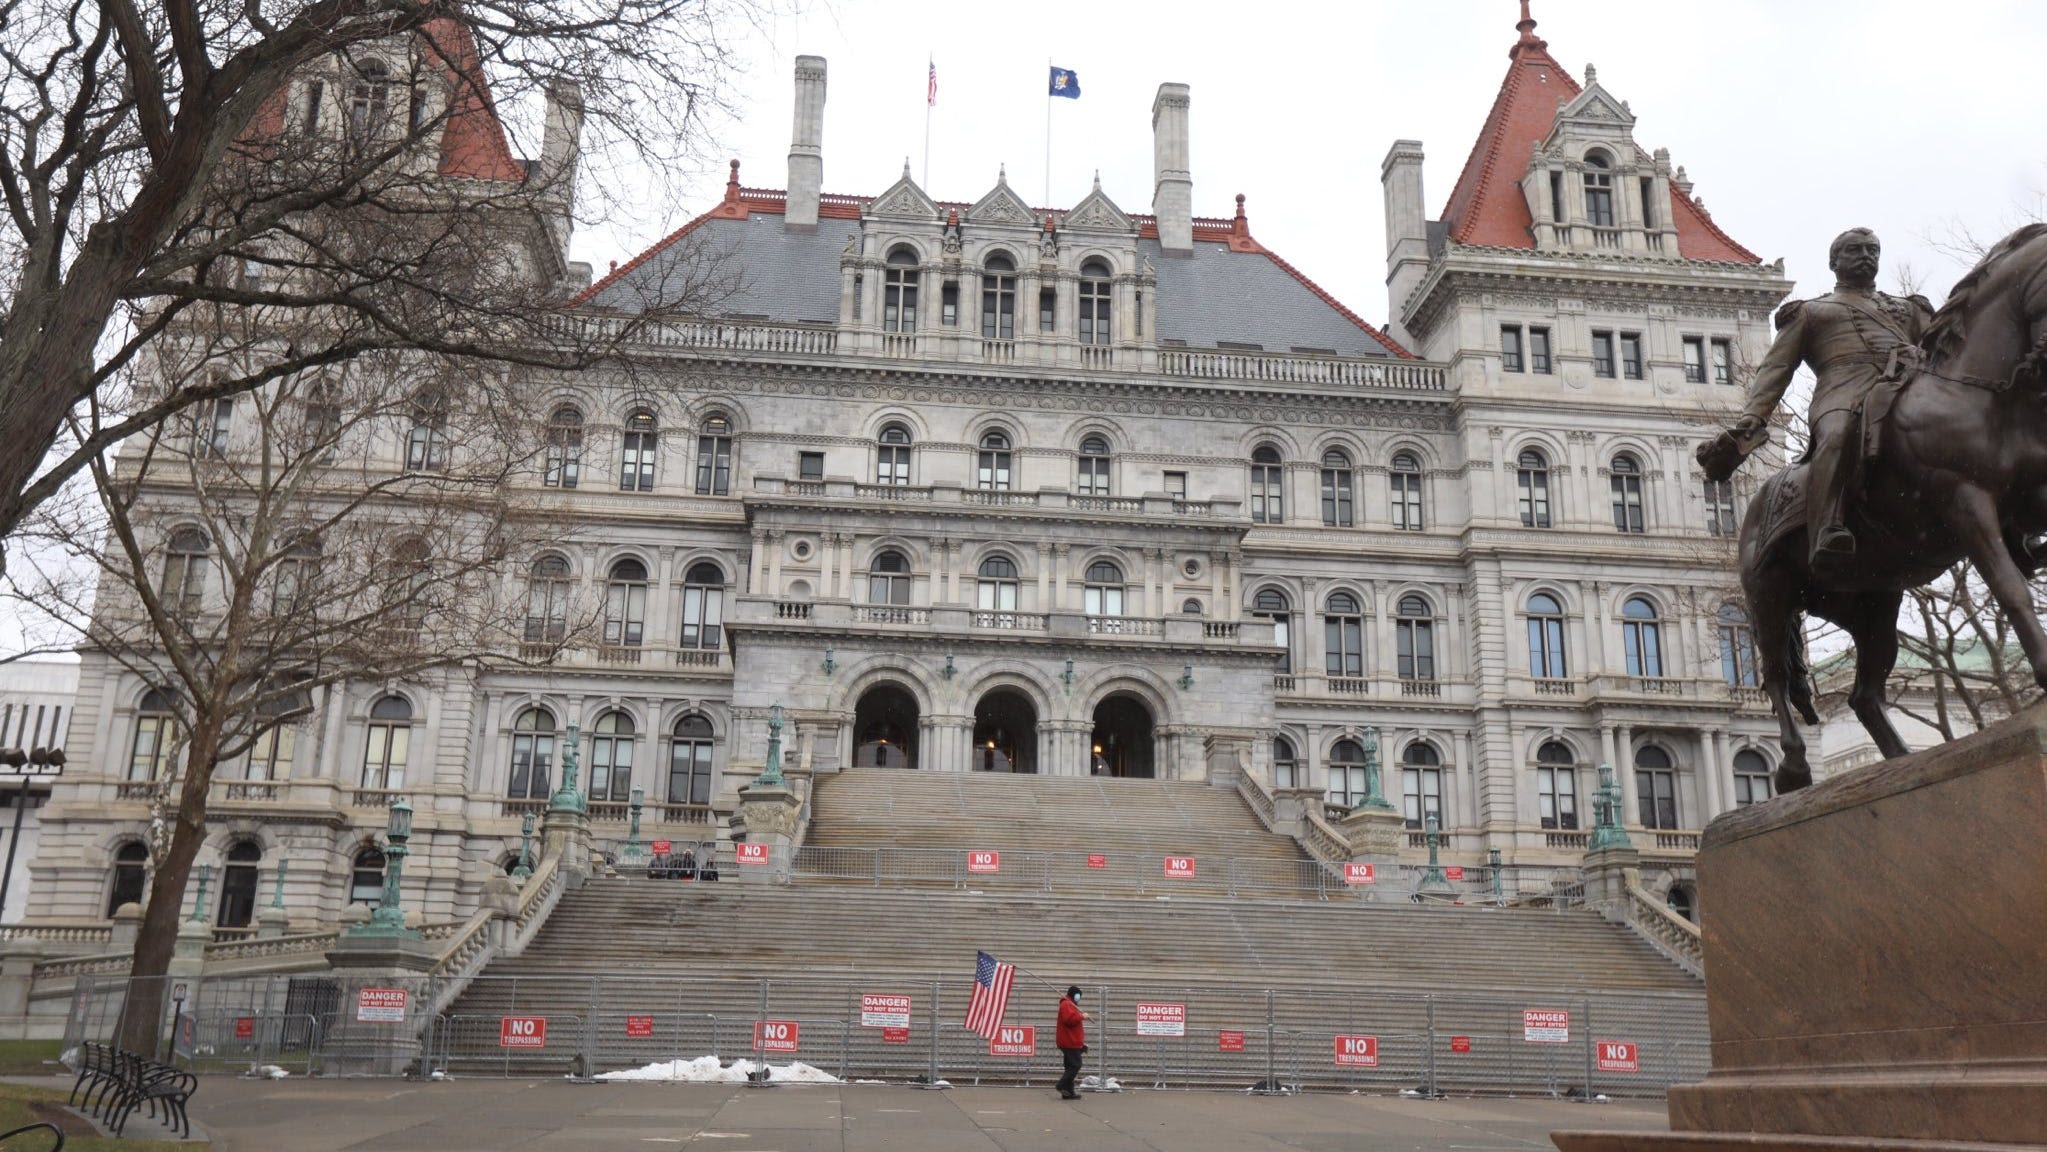 Abortion, LGBTQ rights are on NY ballots this fall. But will the wording confuse voters?